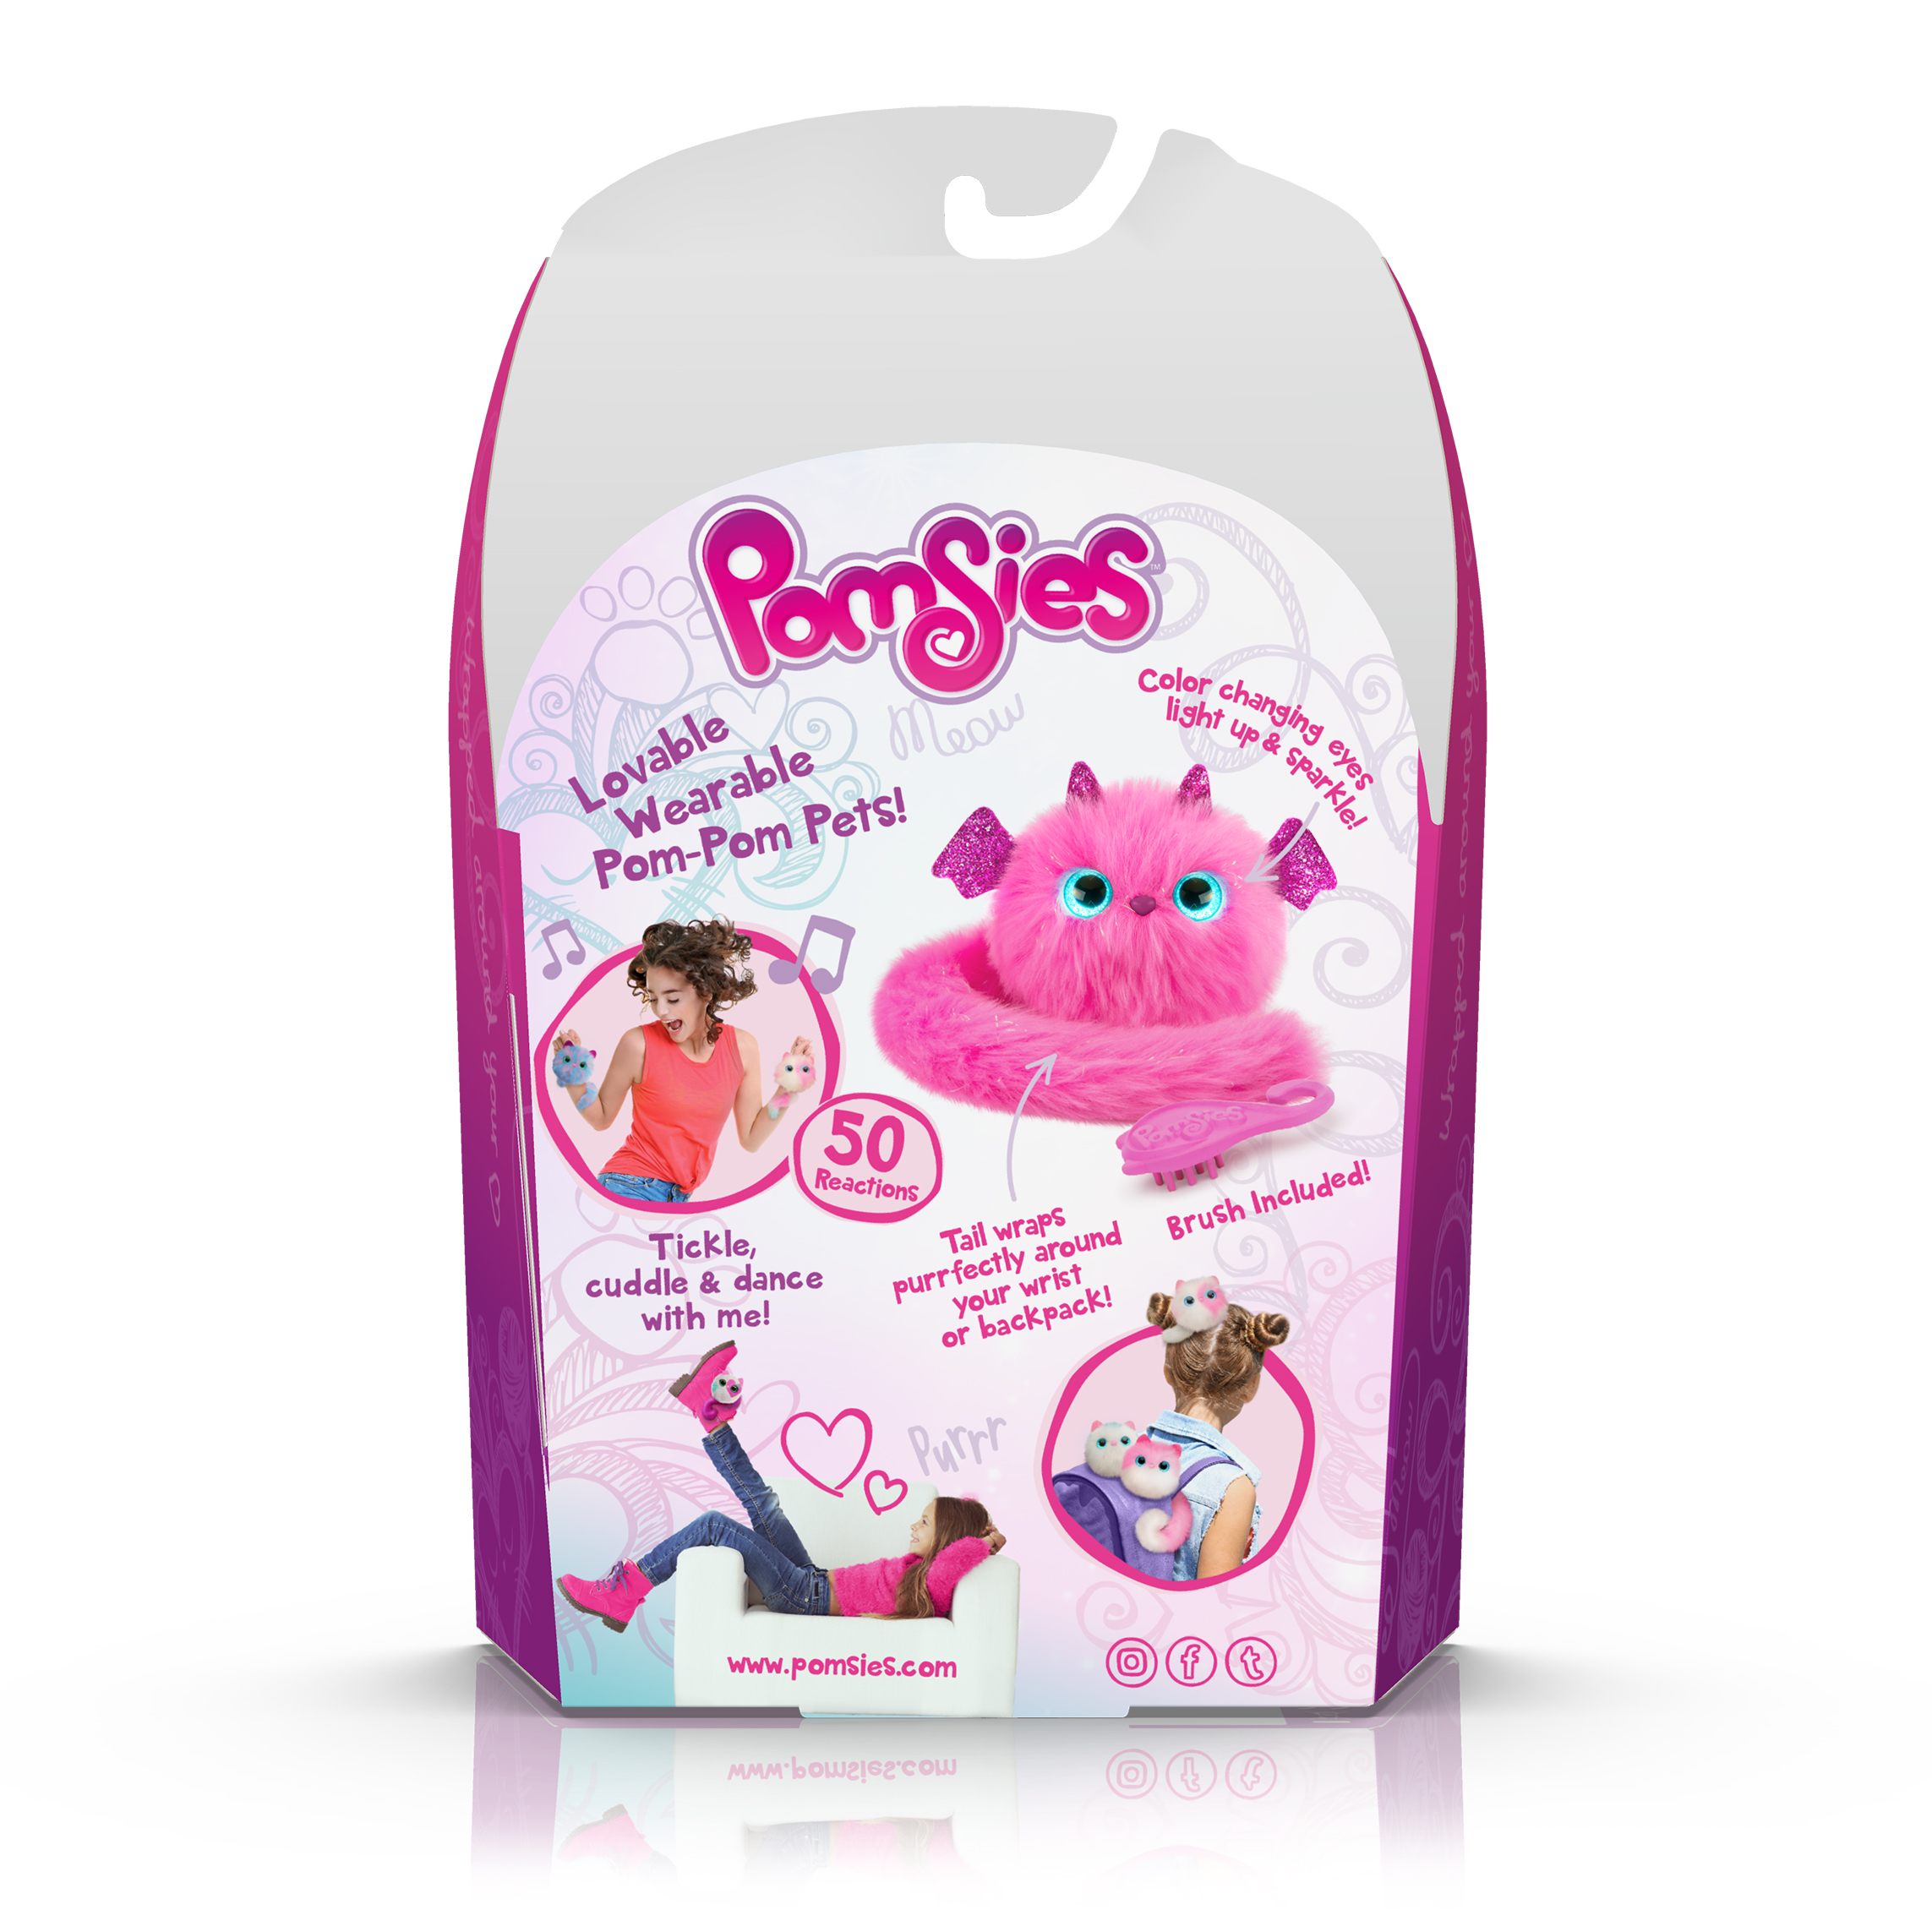 Pomsies Pet Dragon Zoey- Plush Interactive Toy - image 2 of 5